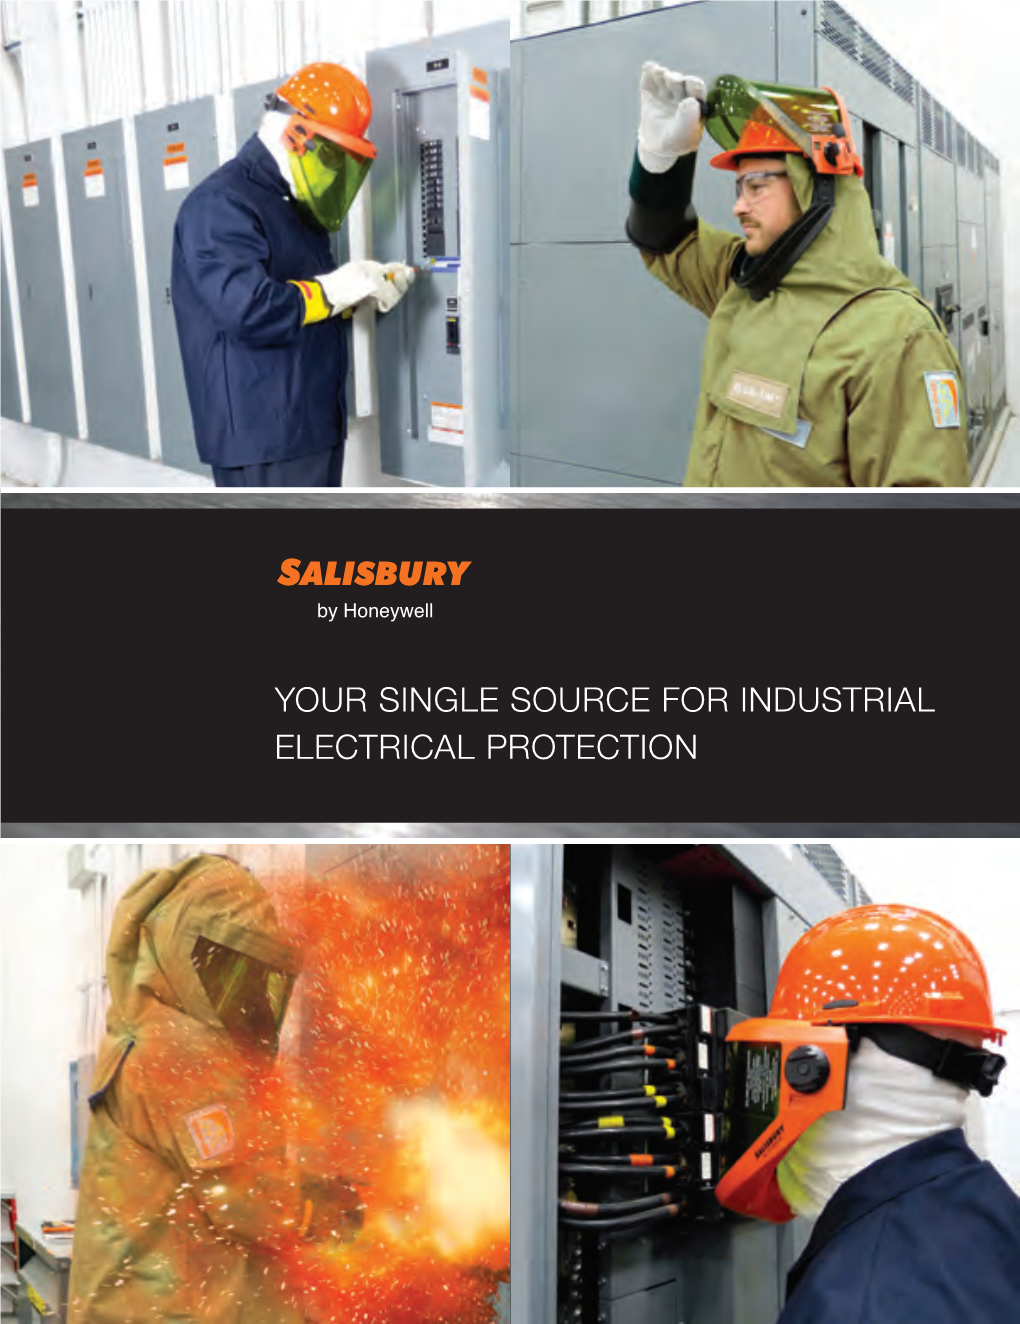 YOUR SINGLE SOURCE for INDUSTRIAL ELECTRICAL PROTECTION 1910.269 & 1926.960 Stay Compliant with OSHA UPDATES